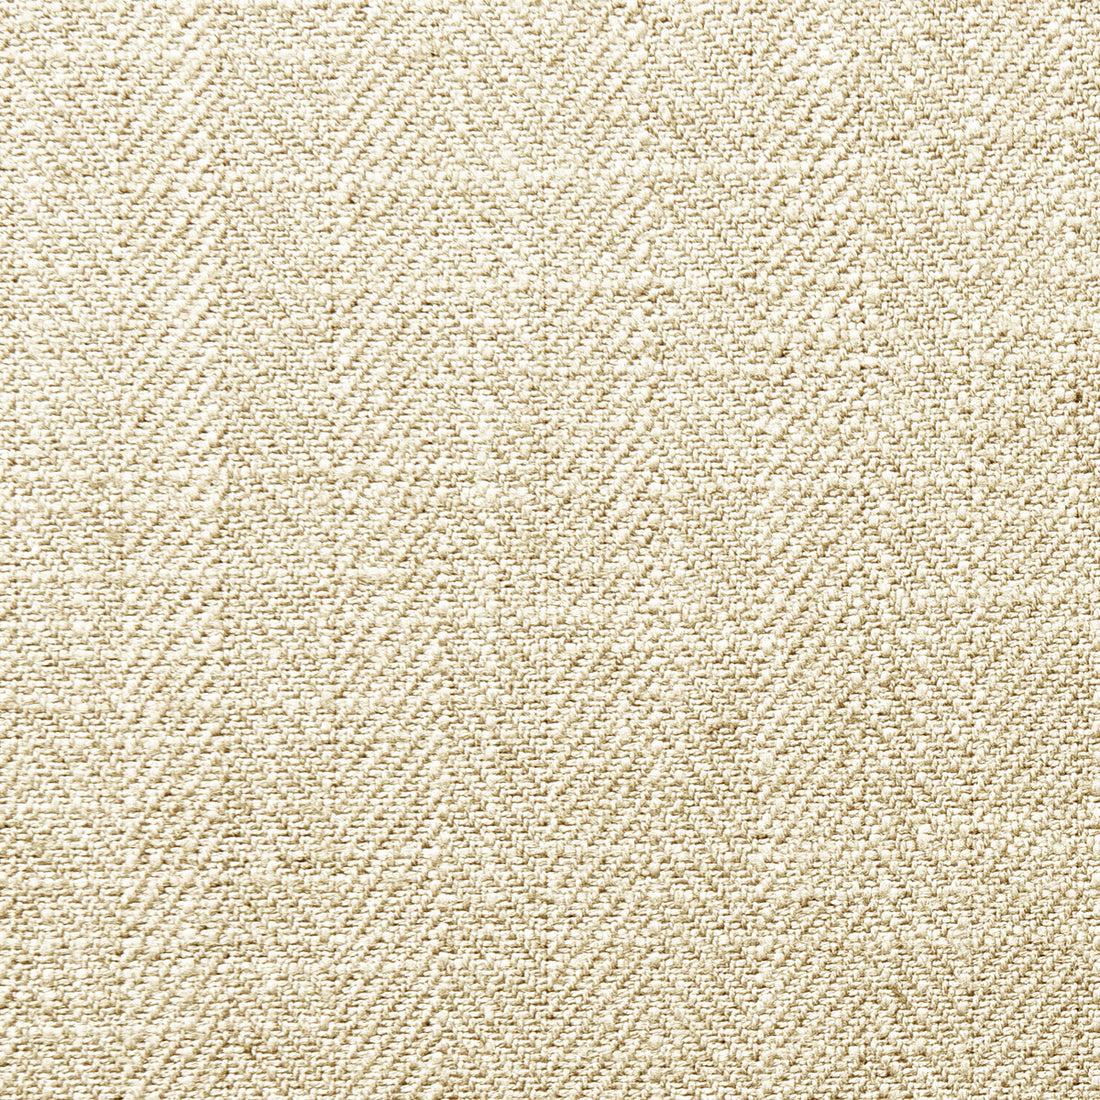 Henley fabric in flax color - pattern F0648/14.CAC.0 - by Clarke And Clarke in the Clarke &amp; Clarke Henley collection